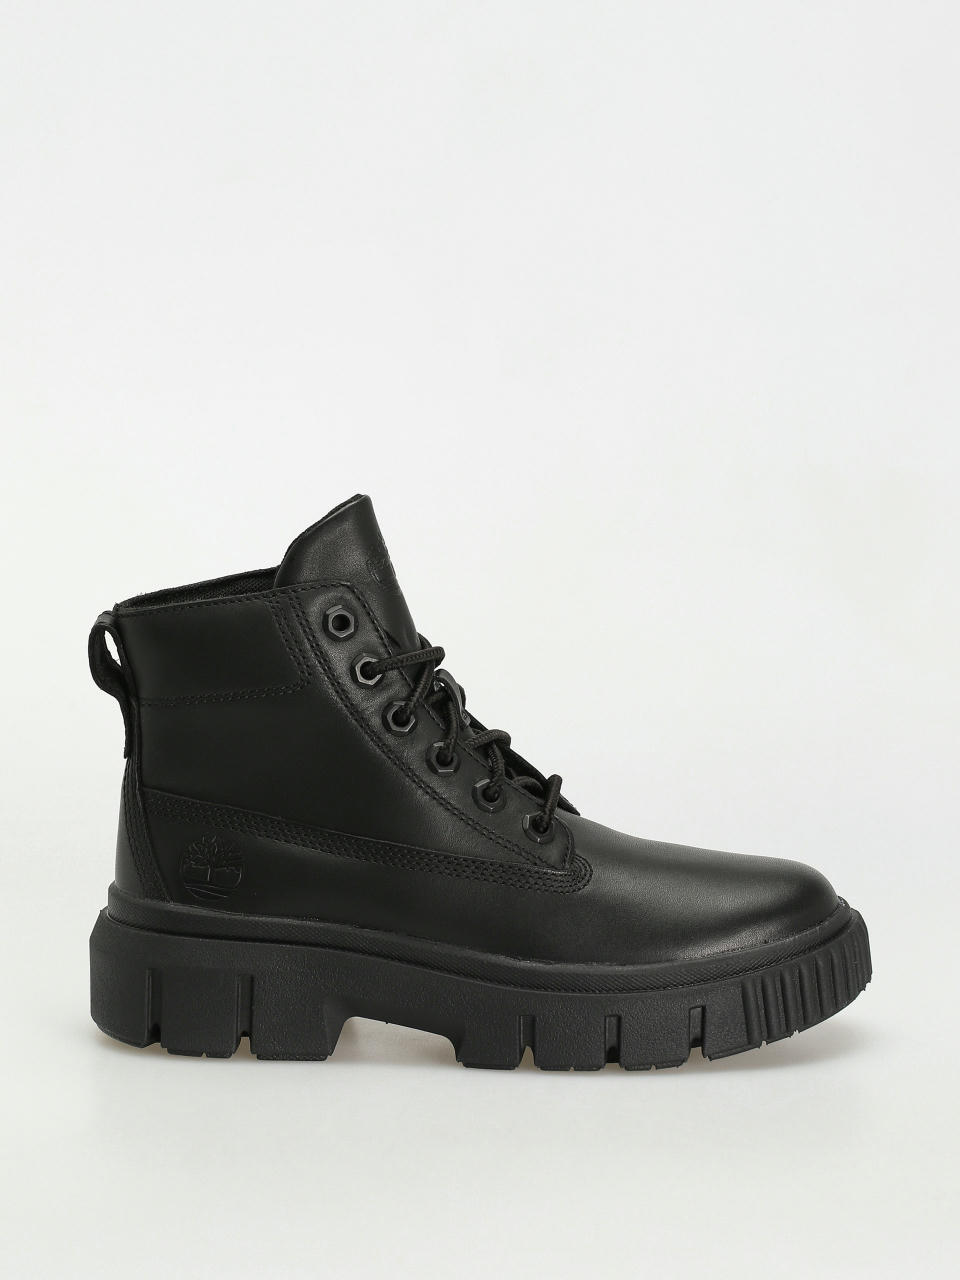 Timberland Greyfield Leather Boot Schuhe Wmn (black full grain)